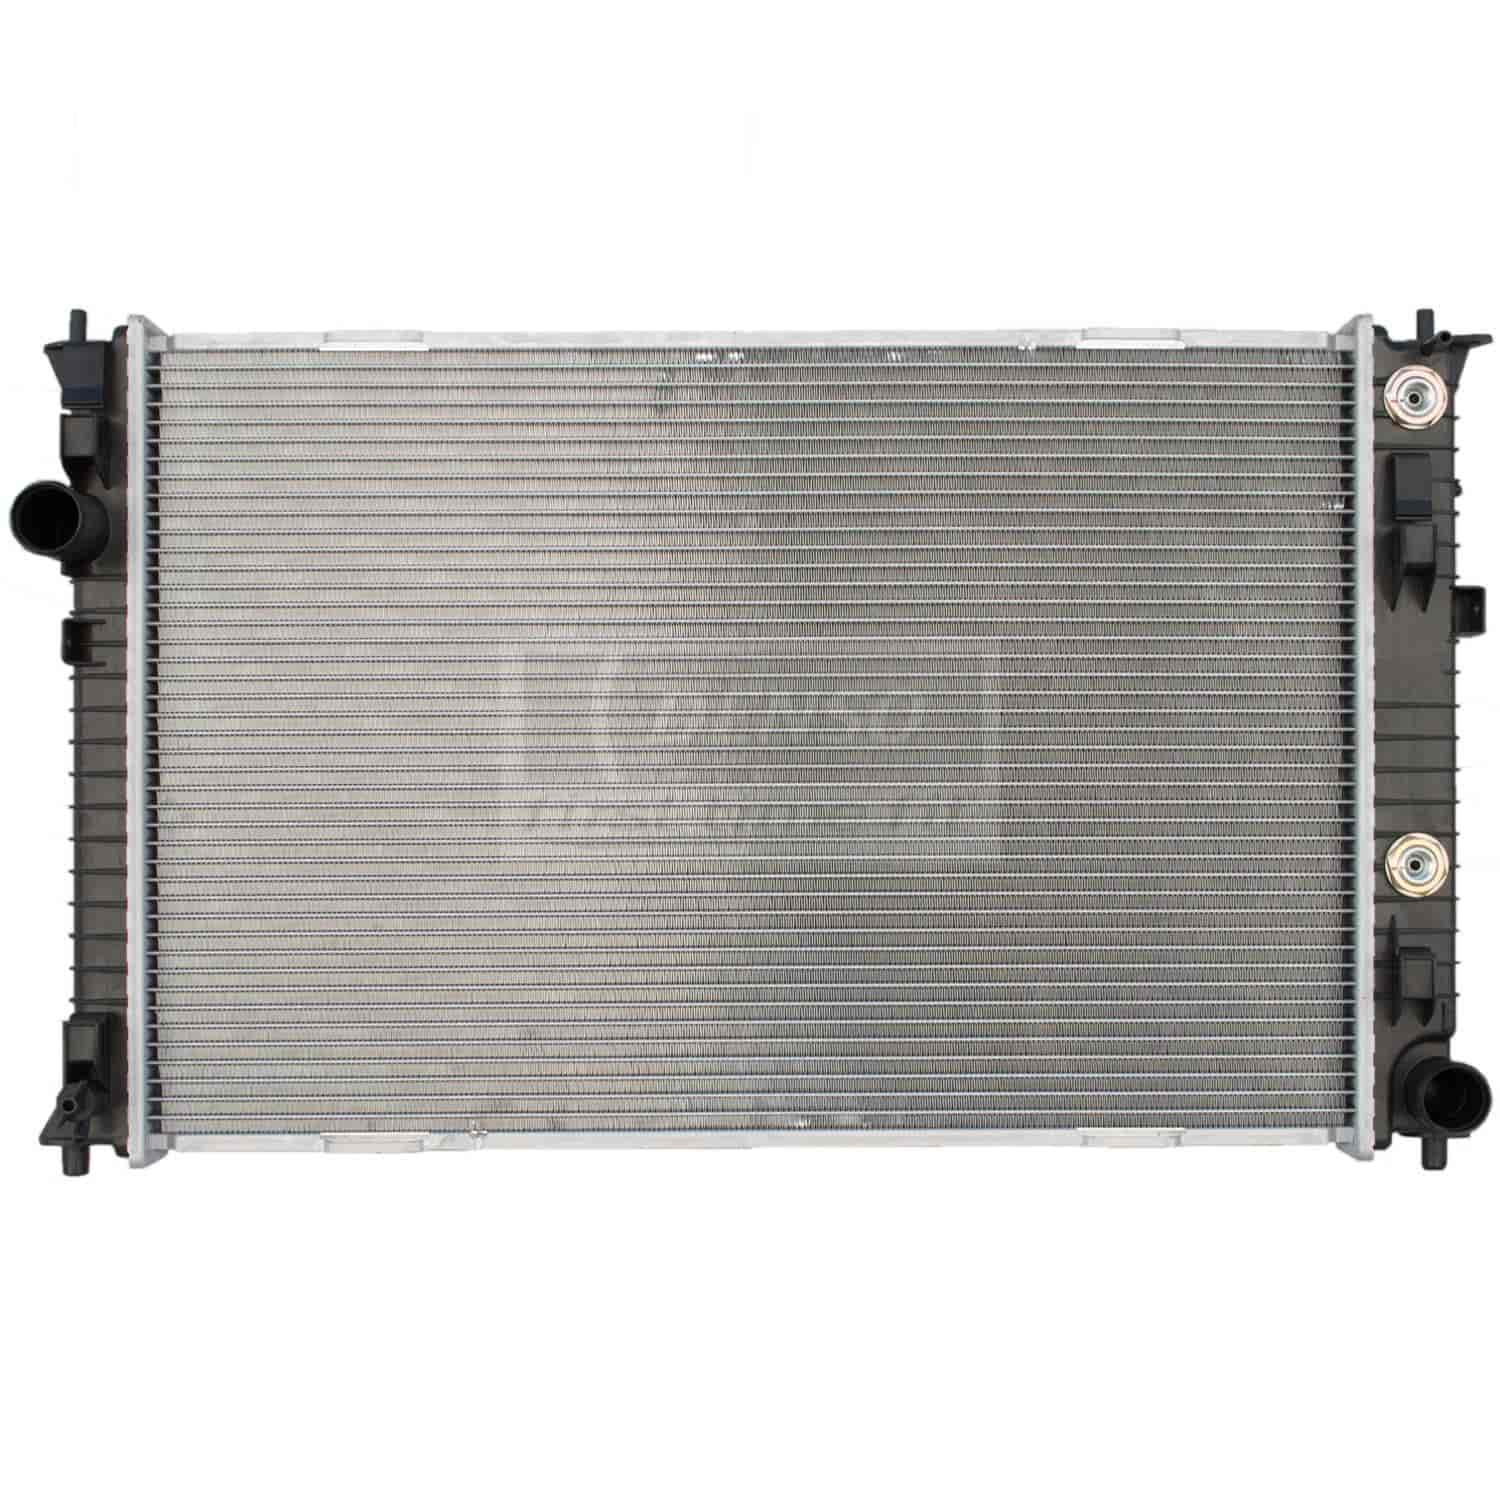 Radiator for Select 2006-2009 Ford, Lincoln, Mercury